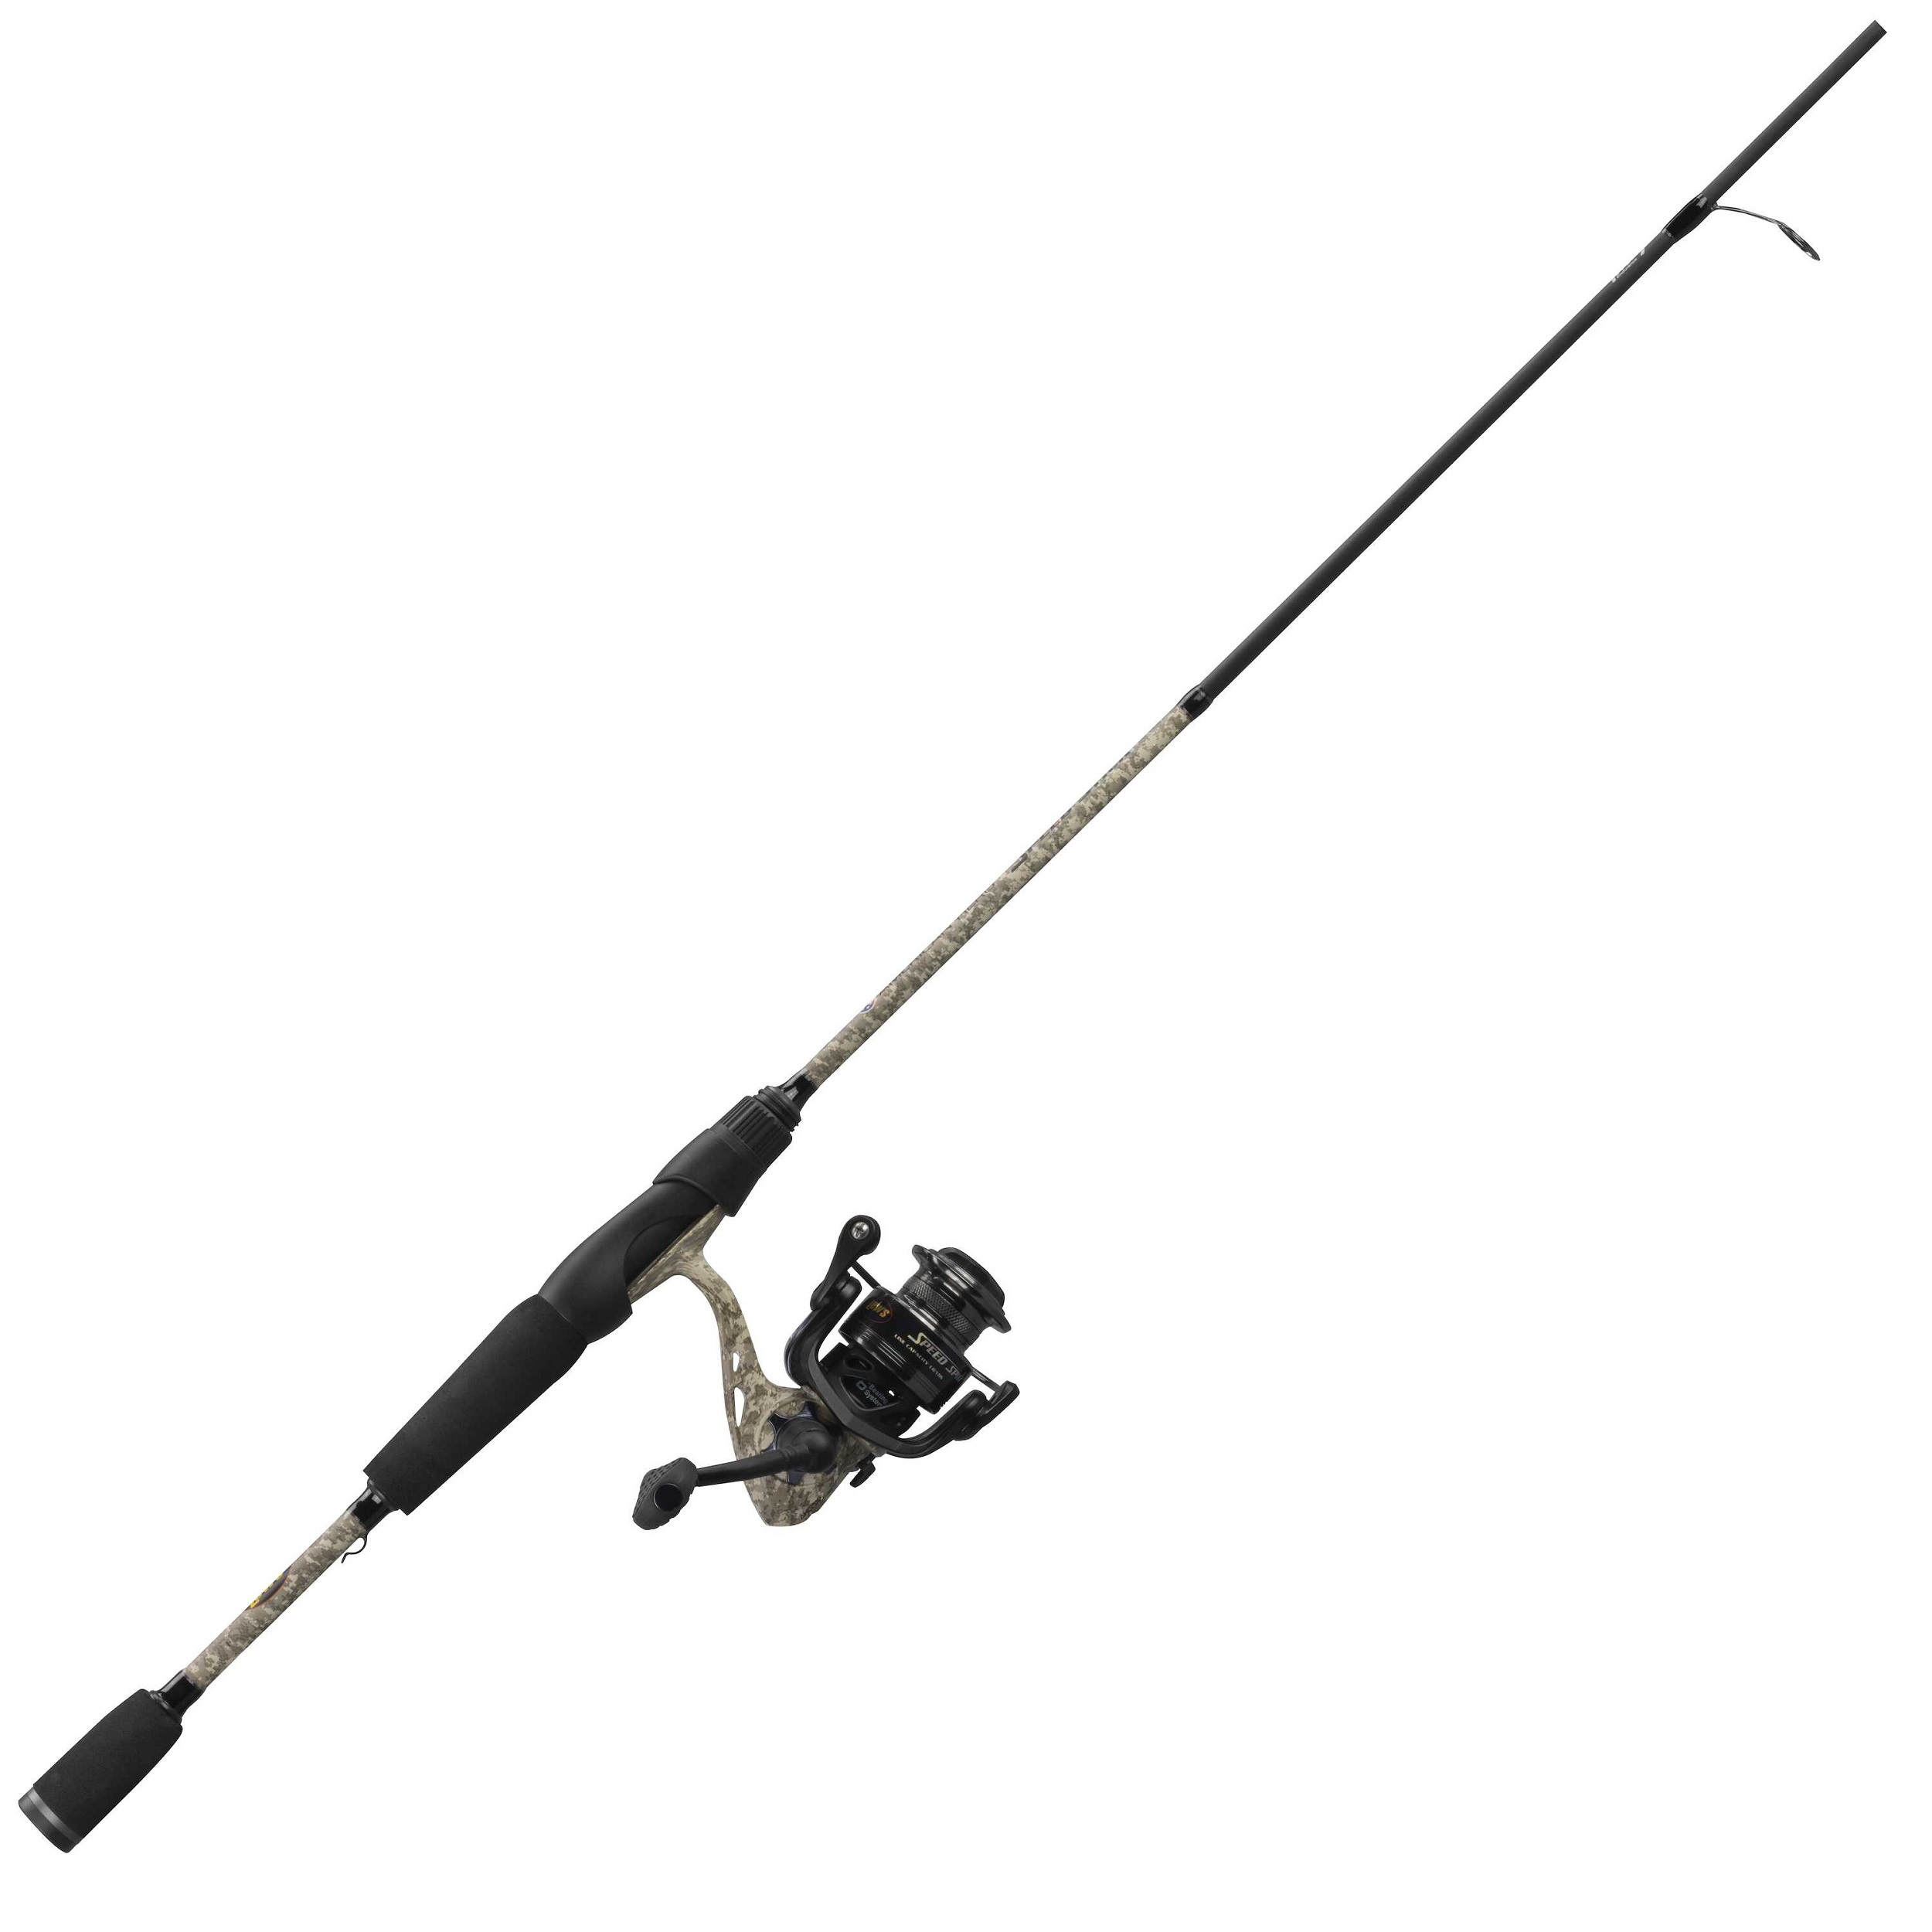 Lew's American Hero Camo 200 6.2:1 6'-2pc Med Spinning Rod and Reel Combo - image 4 of 8